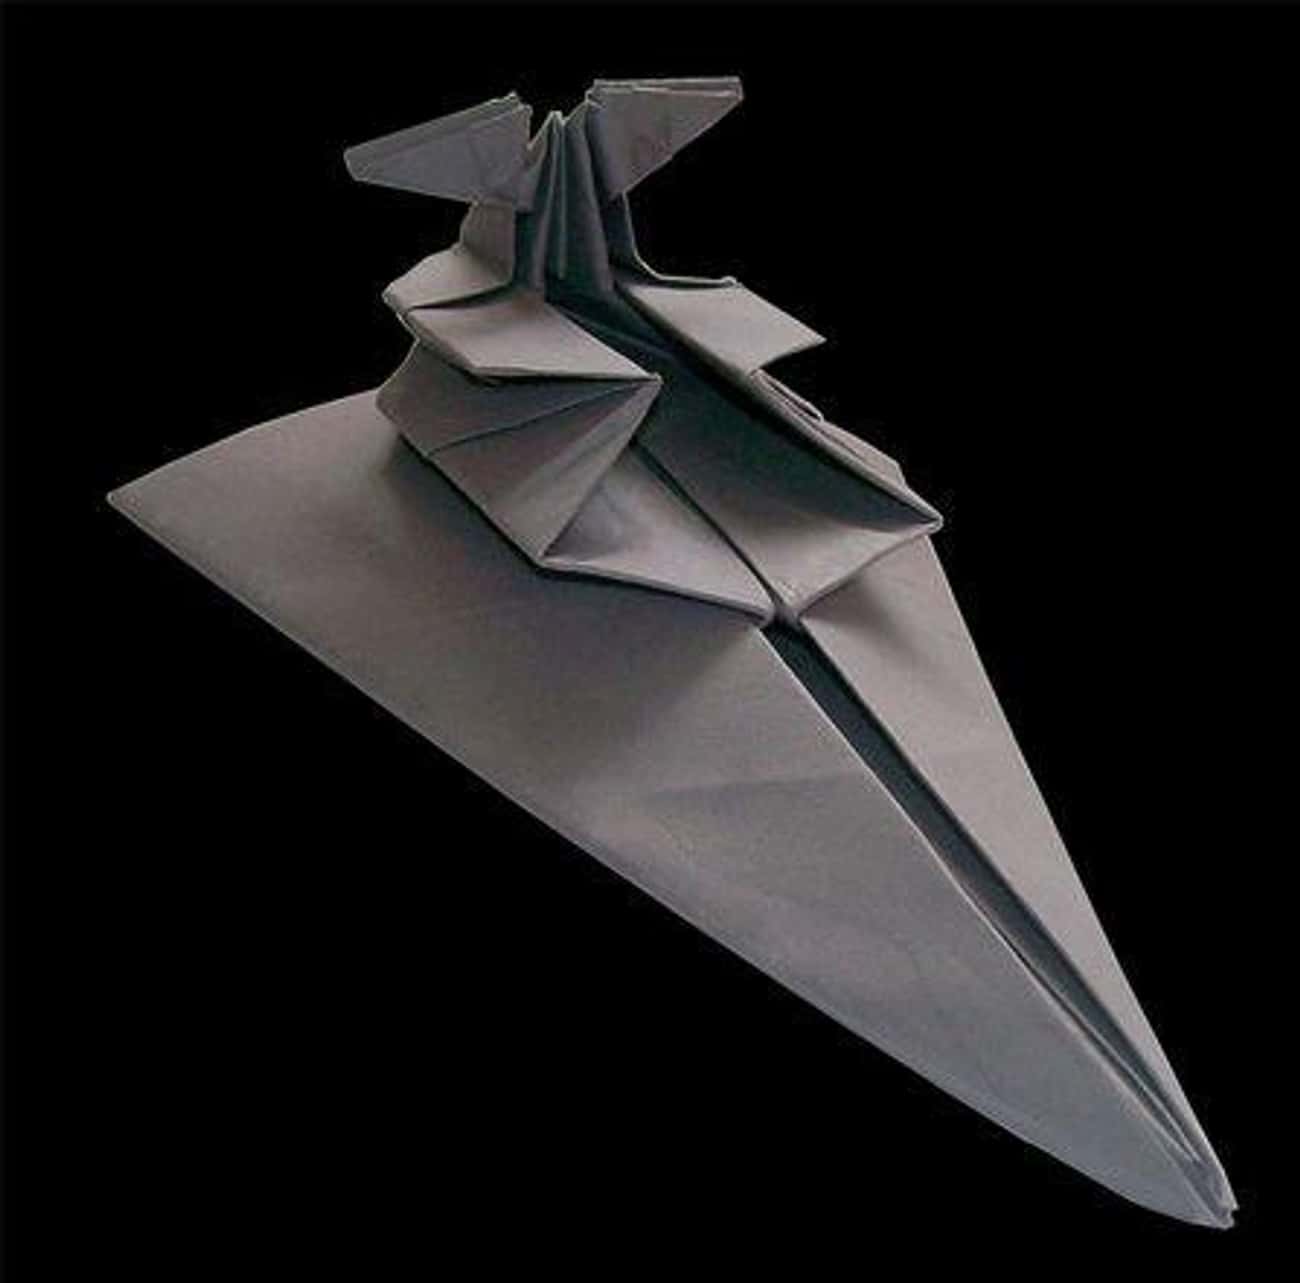 Cool Star Wars Origami That Only Jedi Masters Can Make (Photos)